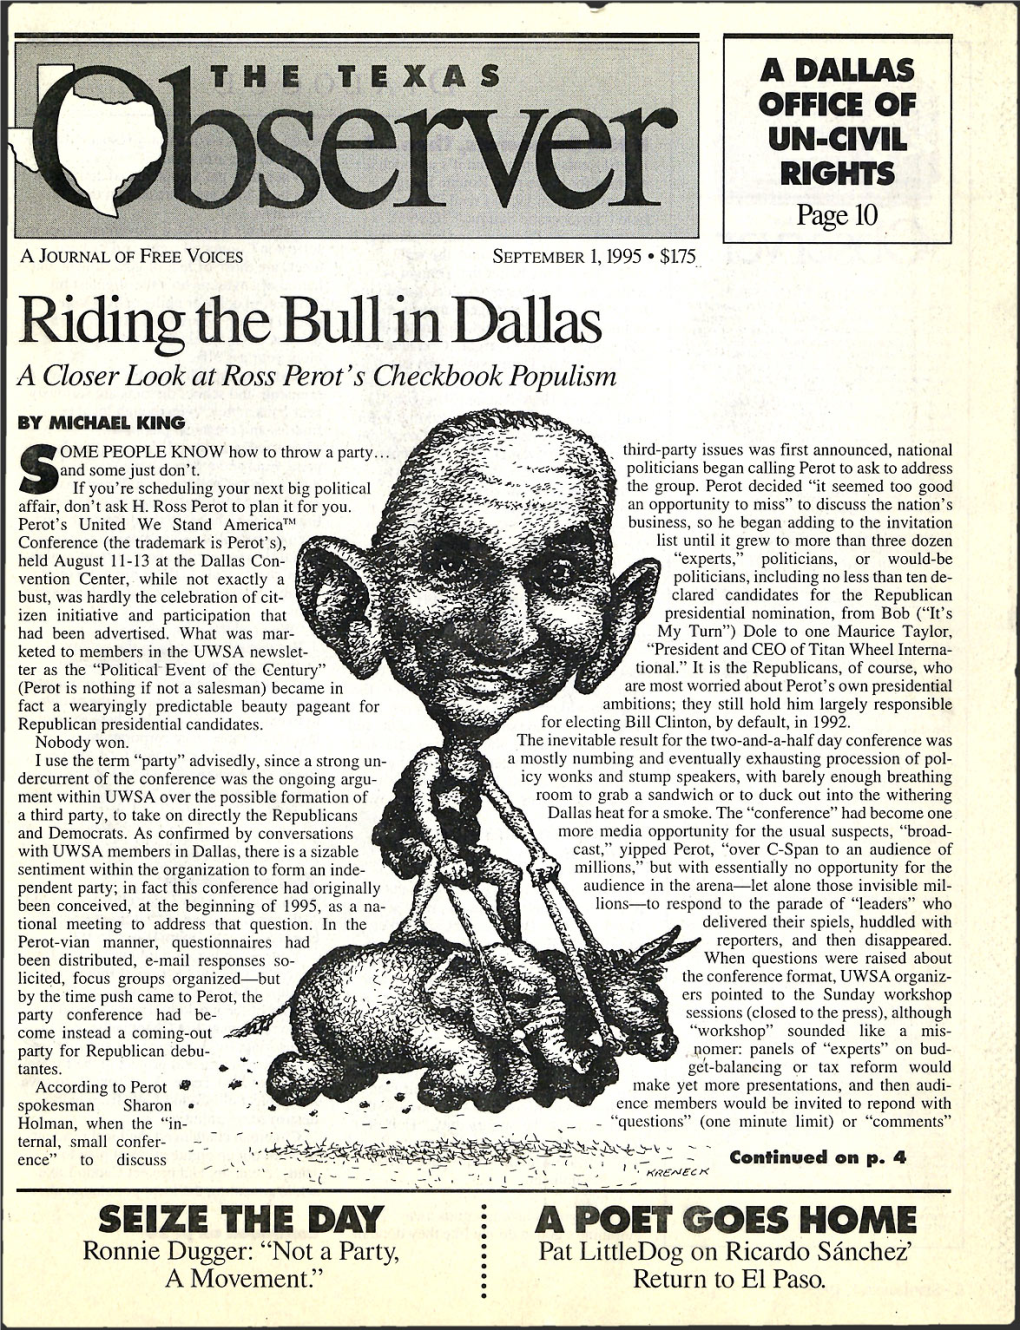 Riding the Bull in Dallas a Closer Look at Ross Perot's Checkbook Populism